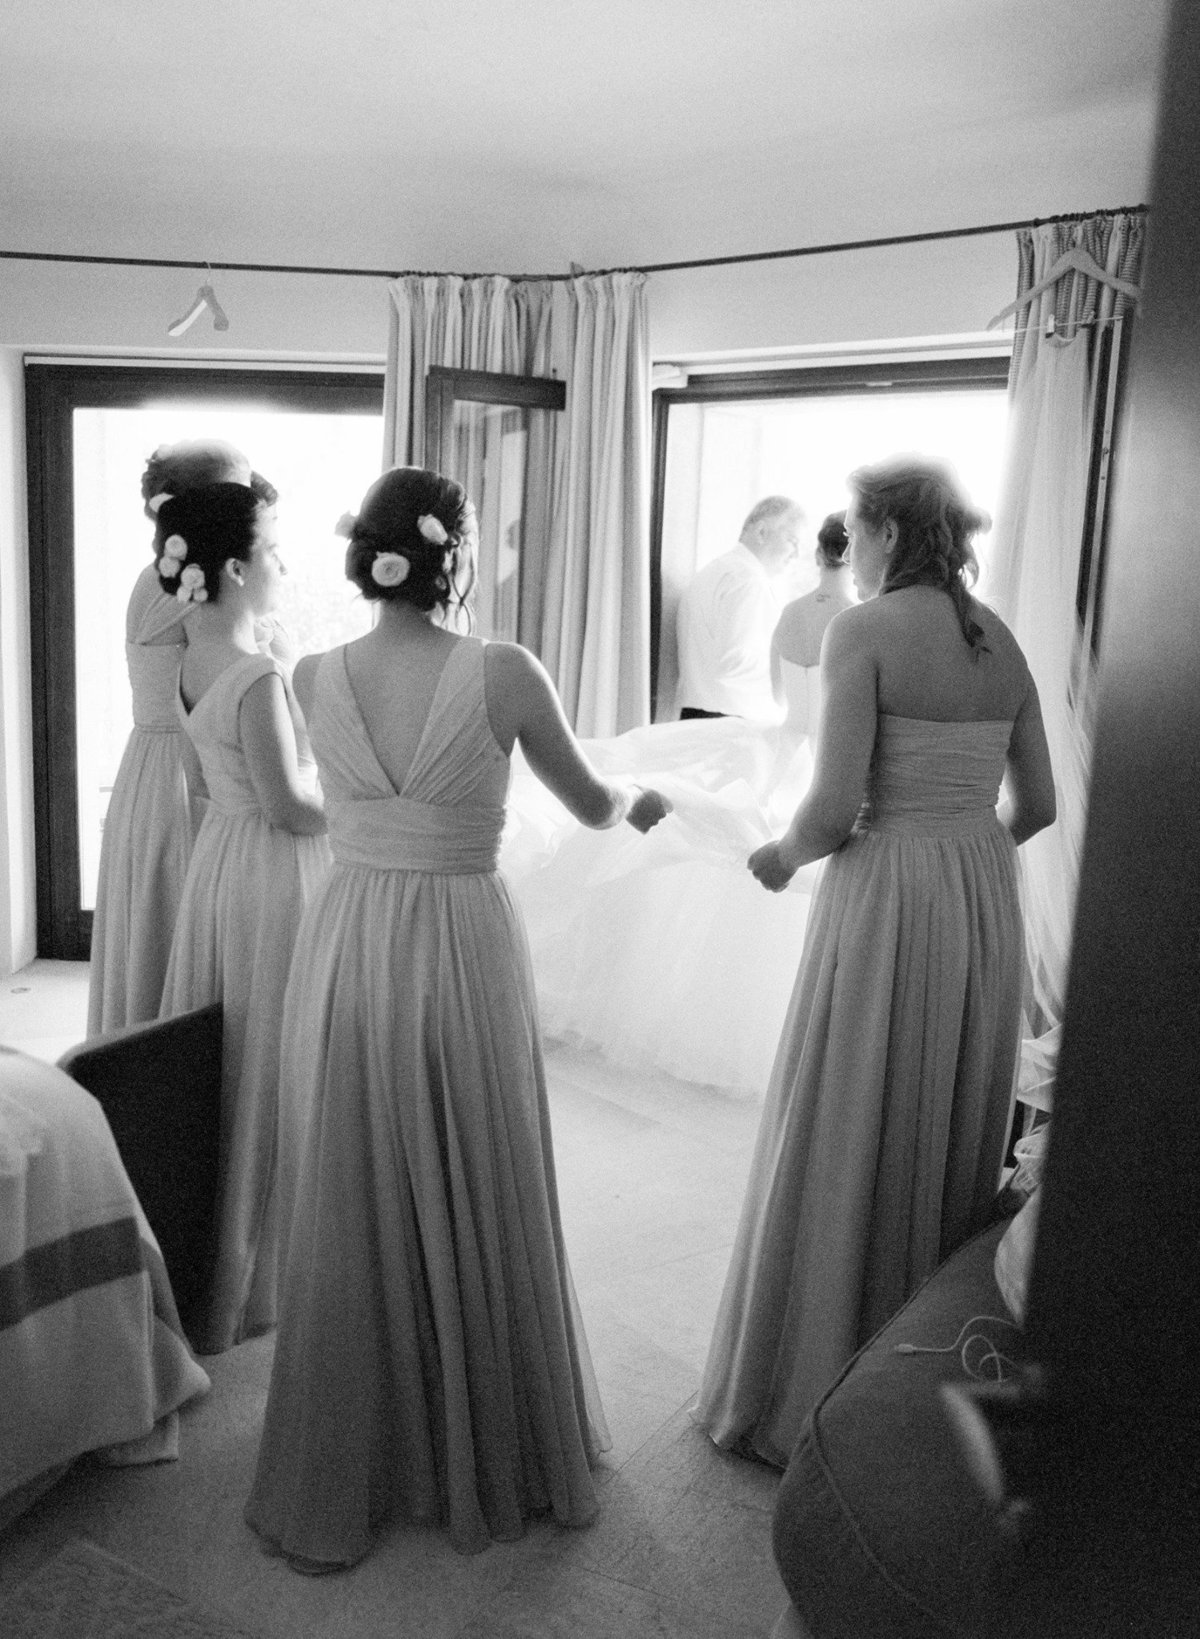 Luxury and love intertwined: The bride and her bridesmaids